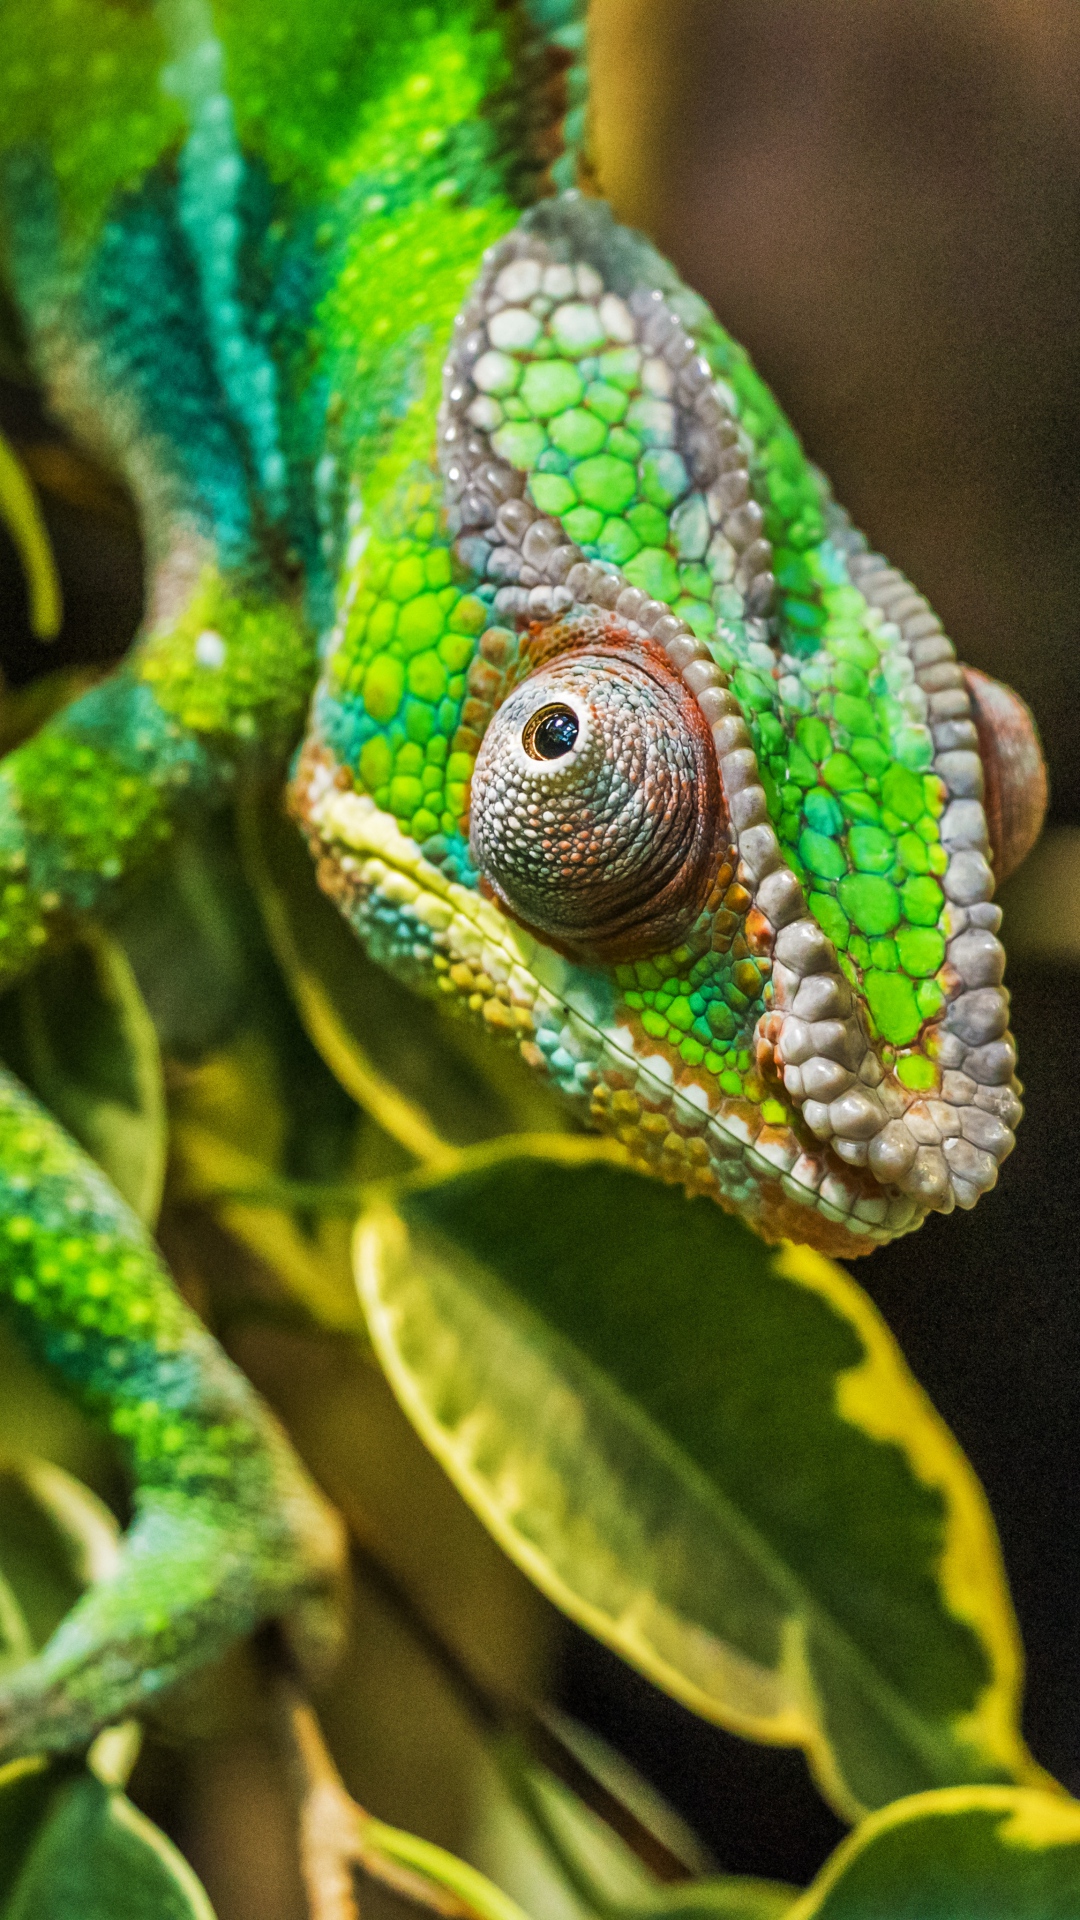 Chameleon Green Color Camouflage Reptile Wallpaper